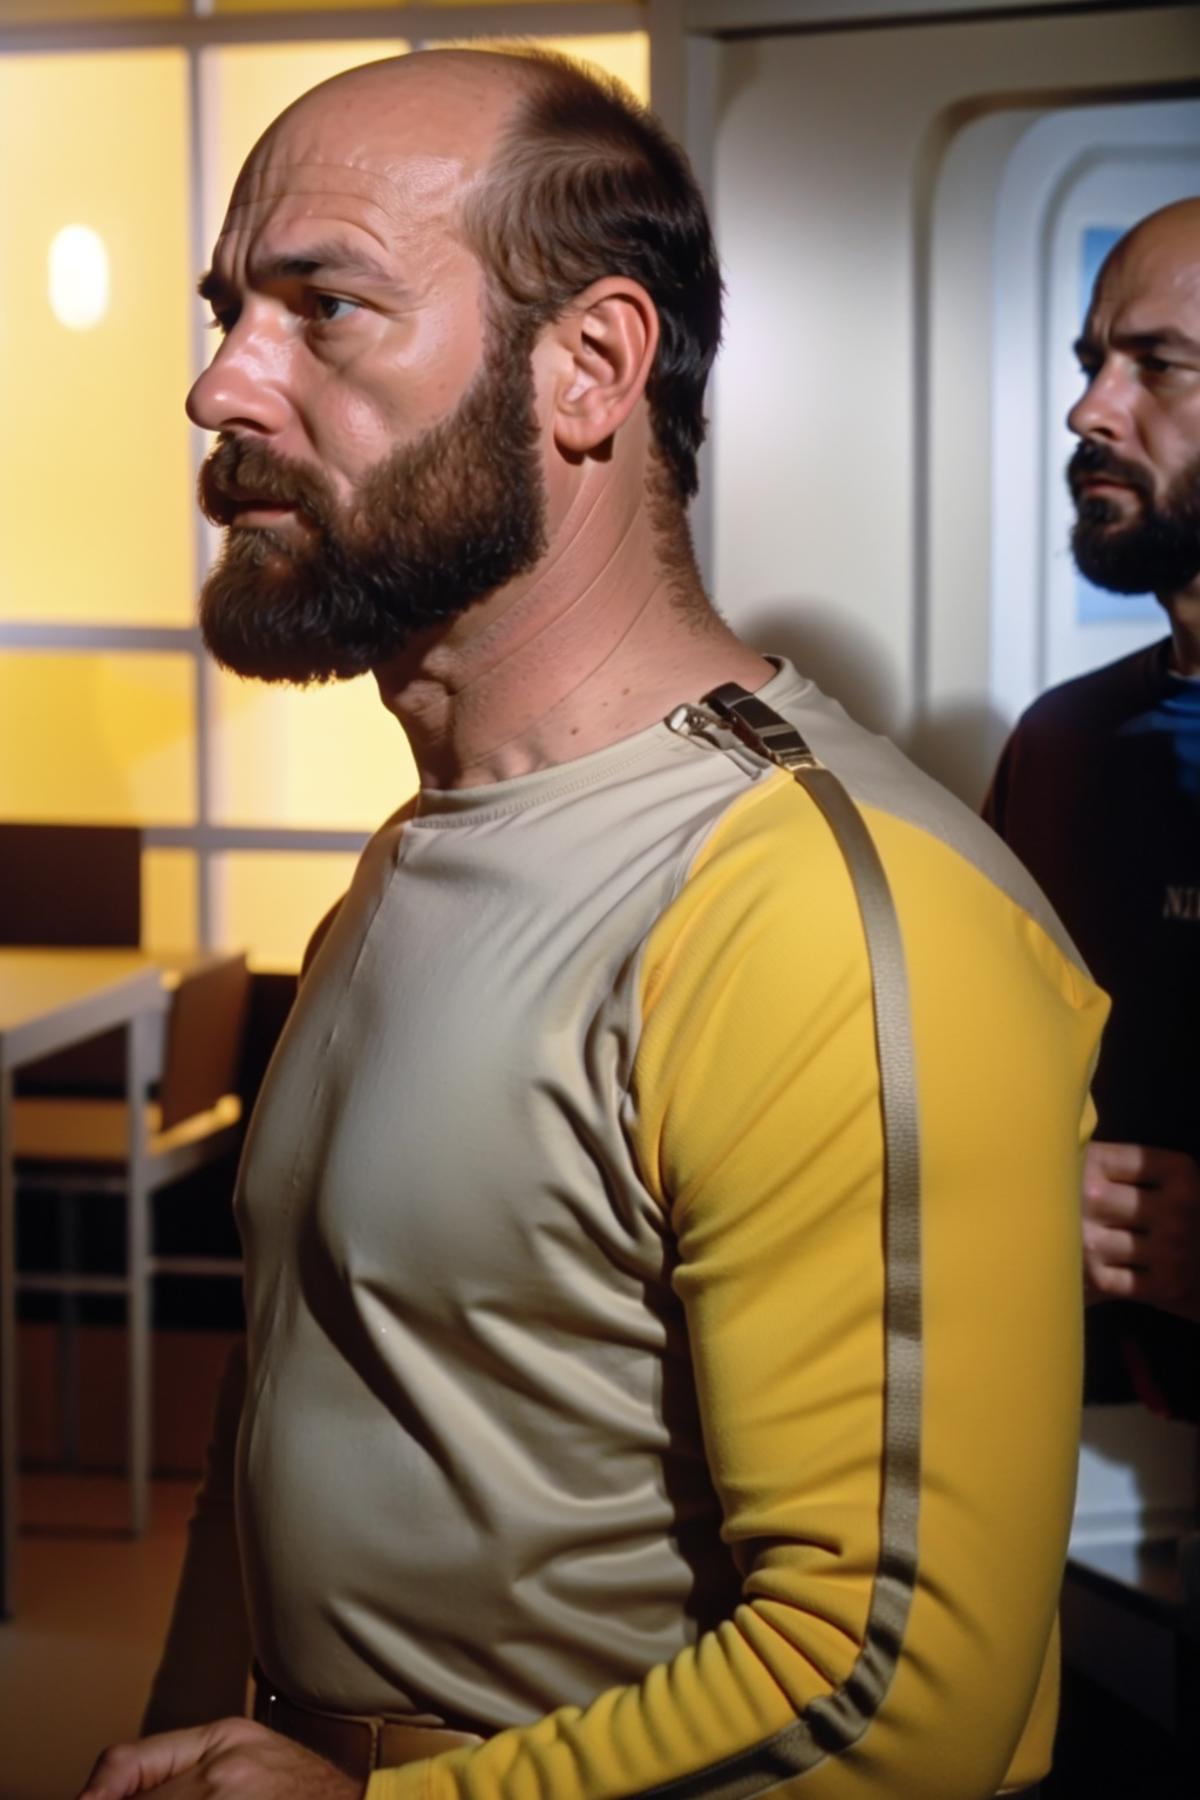 Space 1999 uniforms (small file update) image by impossiblebearcl4060